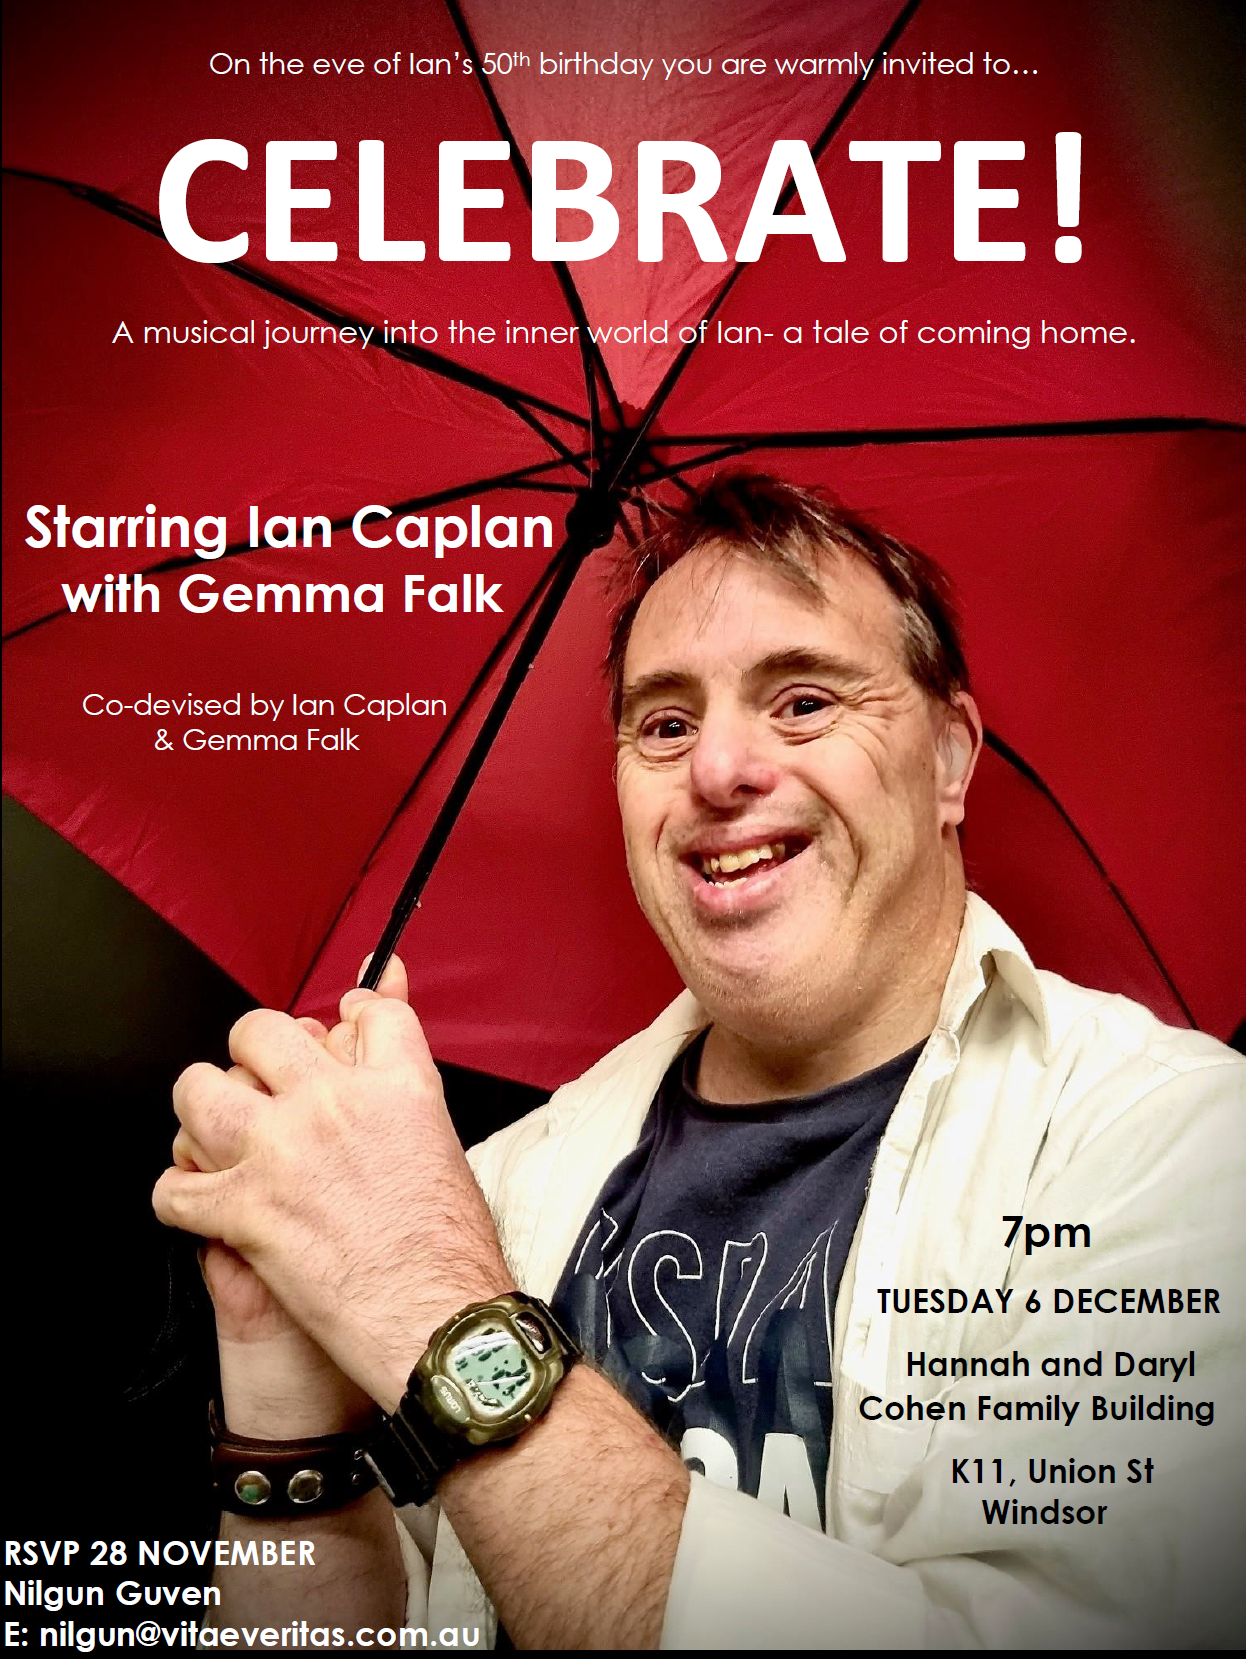 Ian’s show invite with image of Ian holding bright red umbrella whose colour frames his head upon which white text reads- on the eve on Ian’s 50th birthday you are warmly invited to Celebrate! A musical journey into the inner world of Ian, a tale of coming home. Starring Ian Caplan and Gemma Falk, at 7pm 6 Dec at the Cohen Building in Windsor, contact Nilgun. Photo by Gemma Falk.